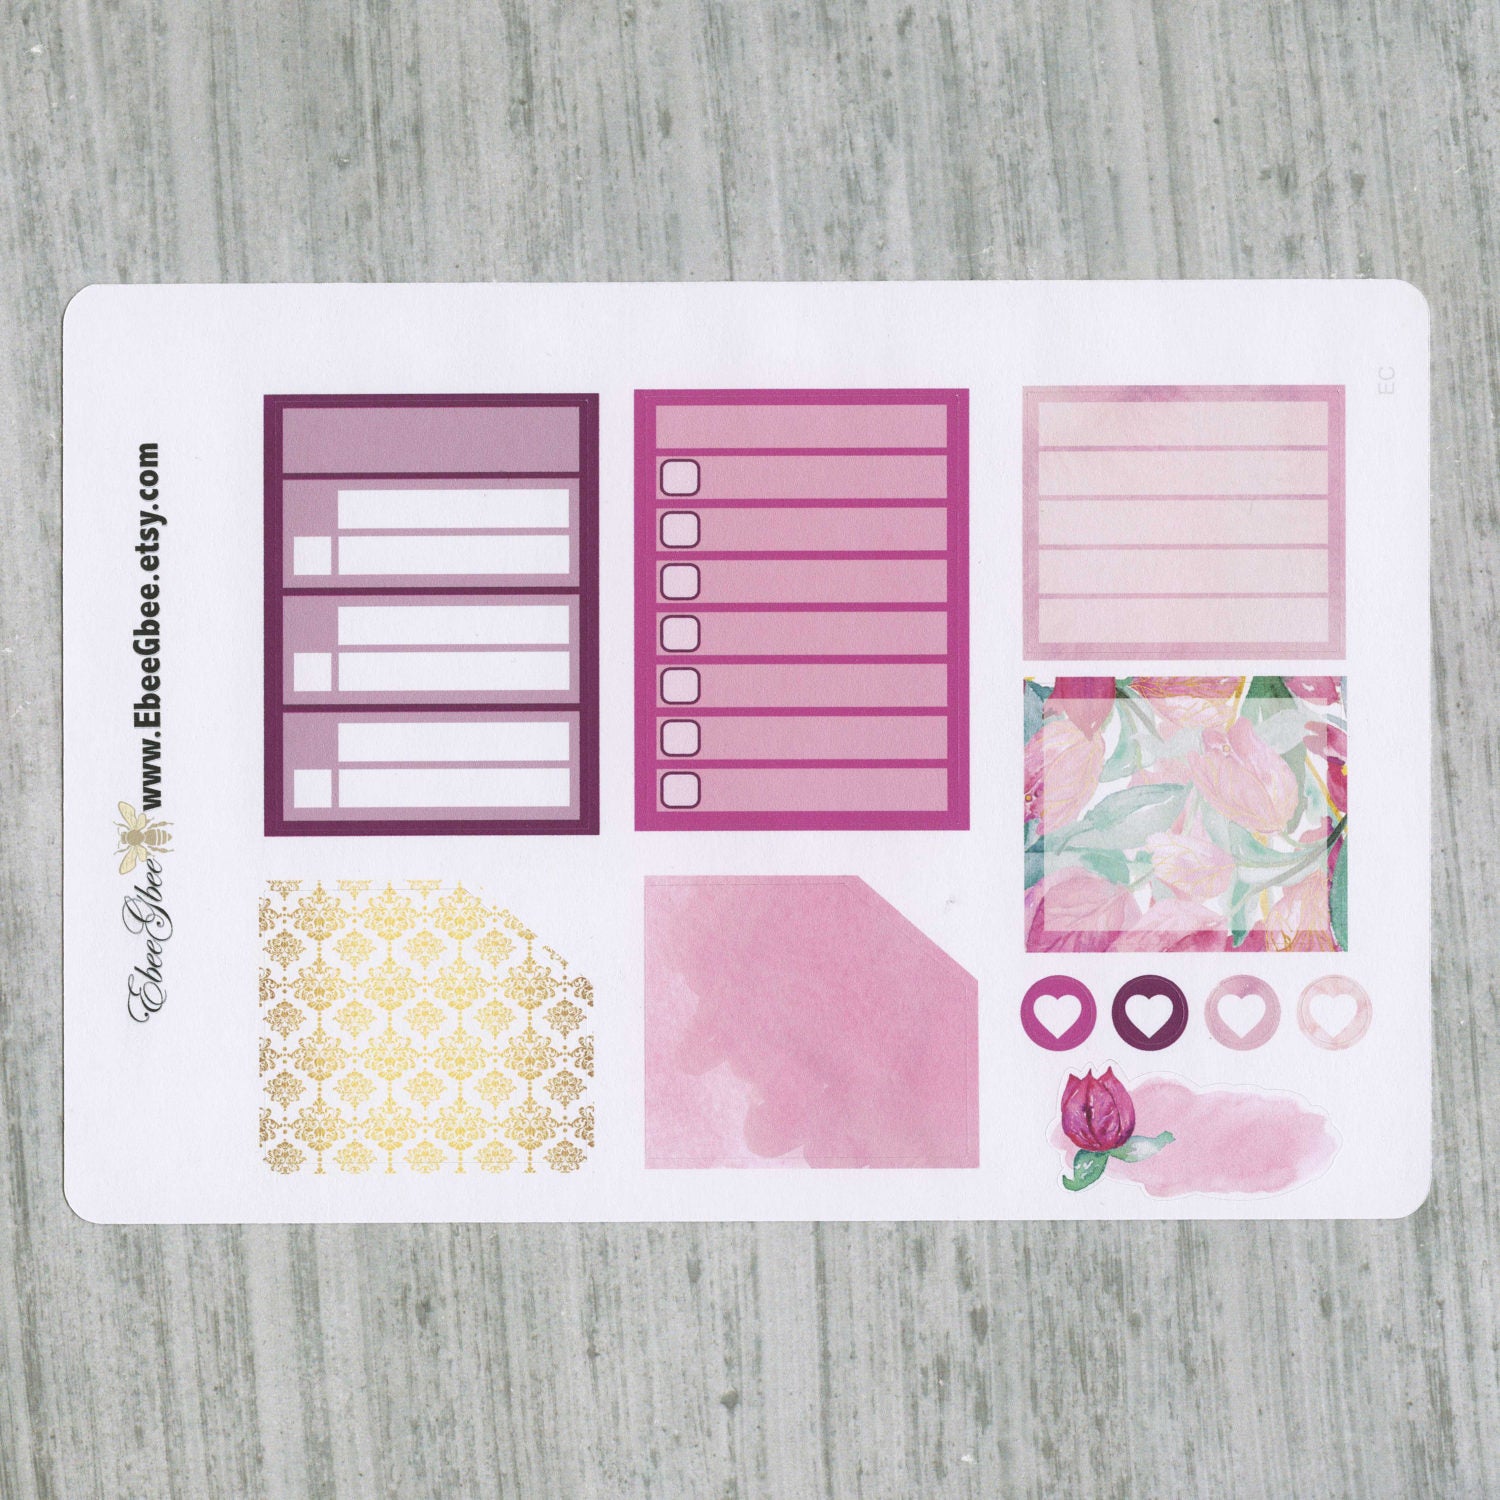 BOUGAINVILLEA MONTHLY  Layout Planner Stickers  | You Pick Your Month | Bougainvillea Pine